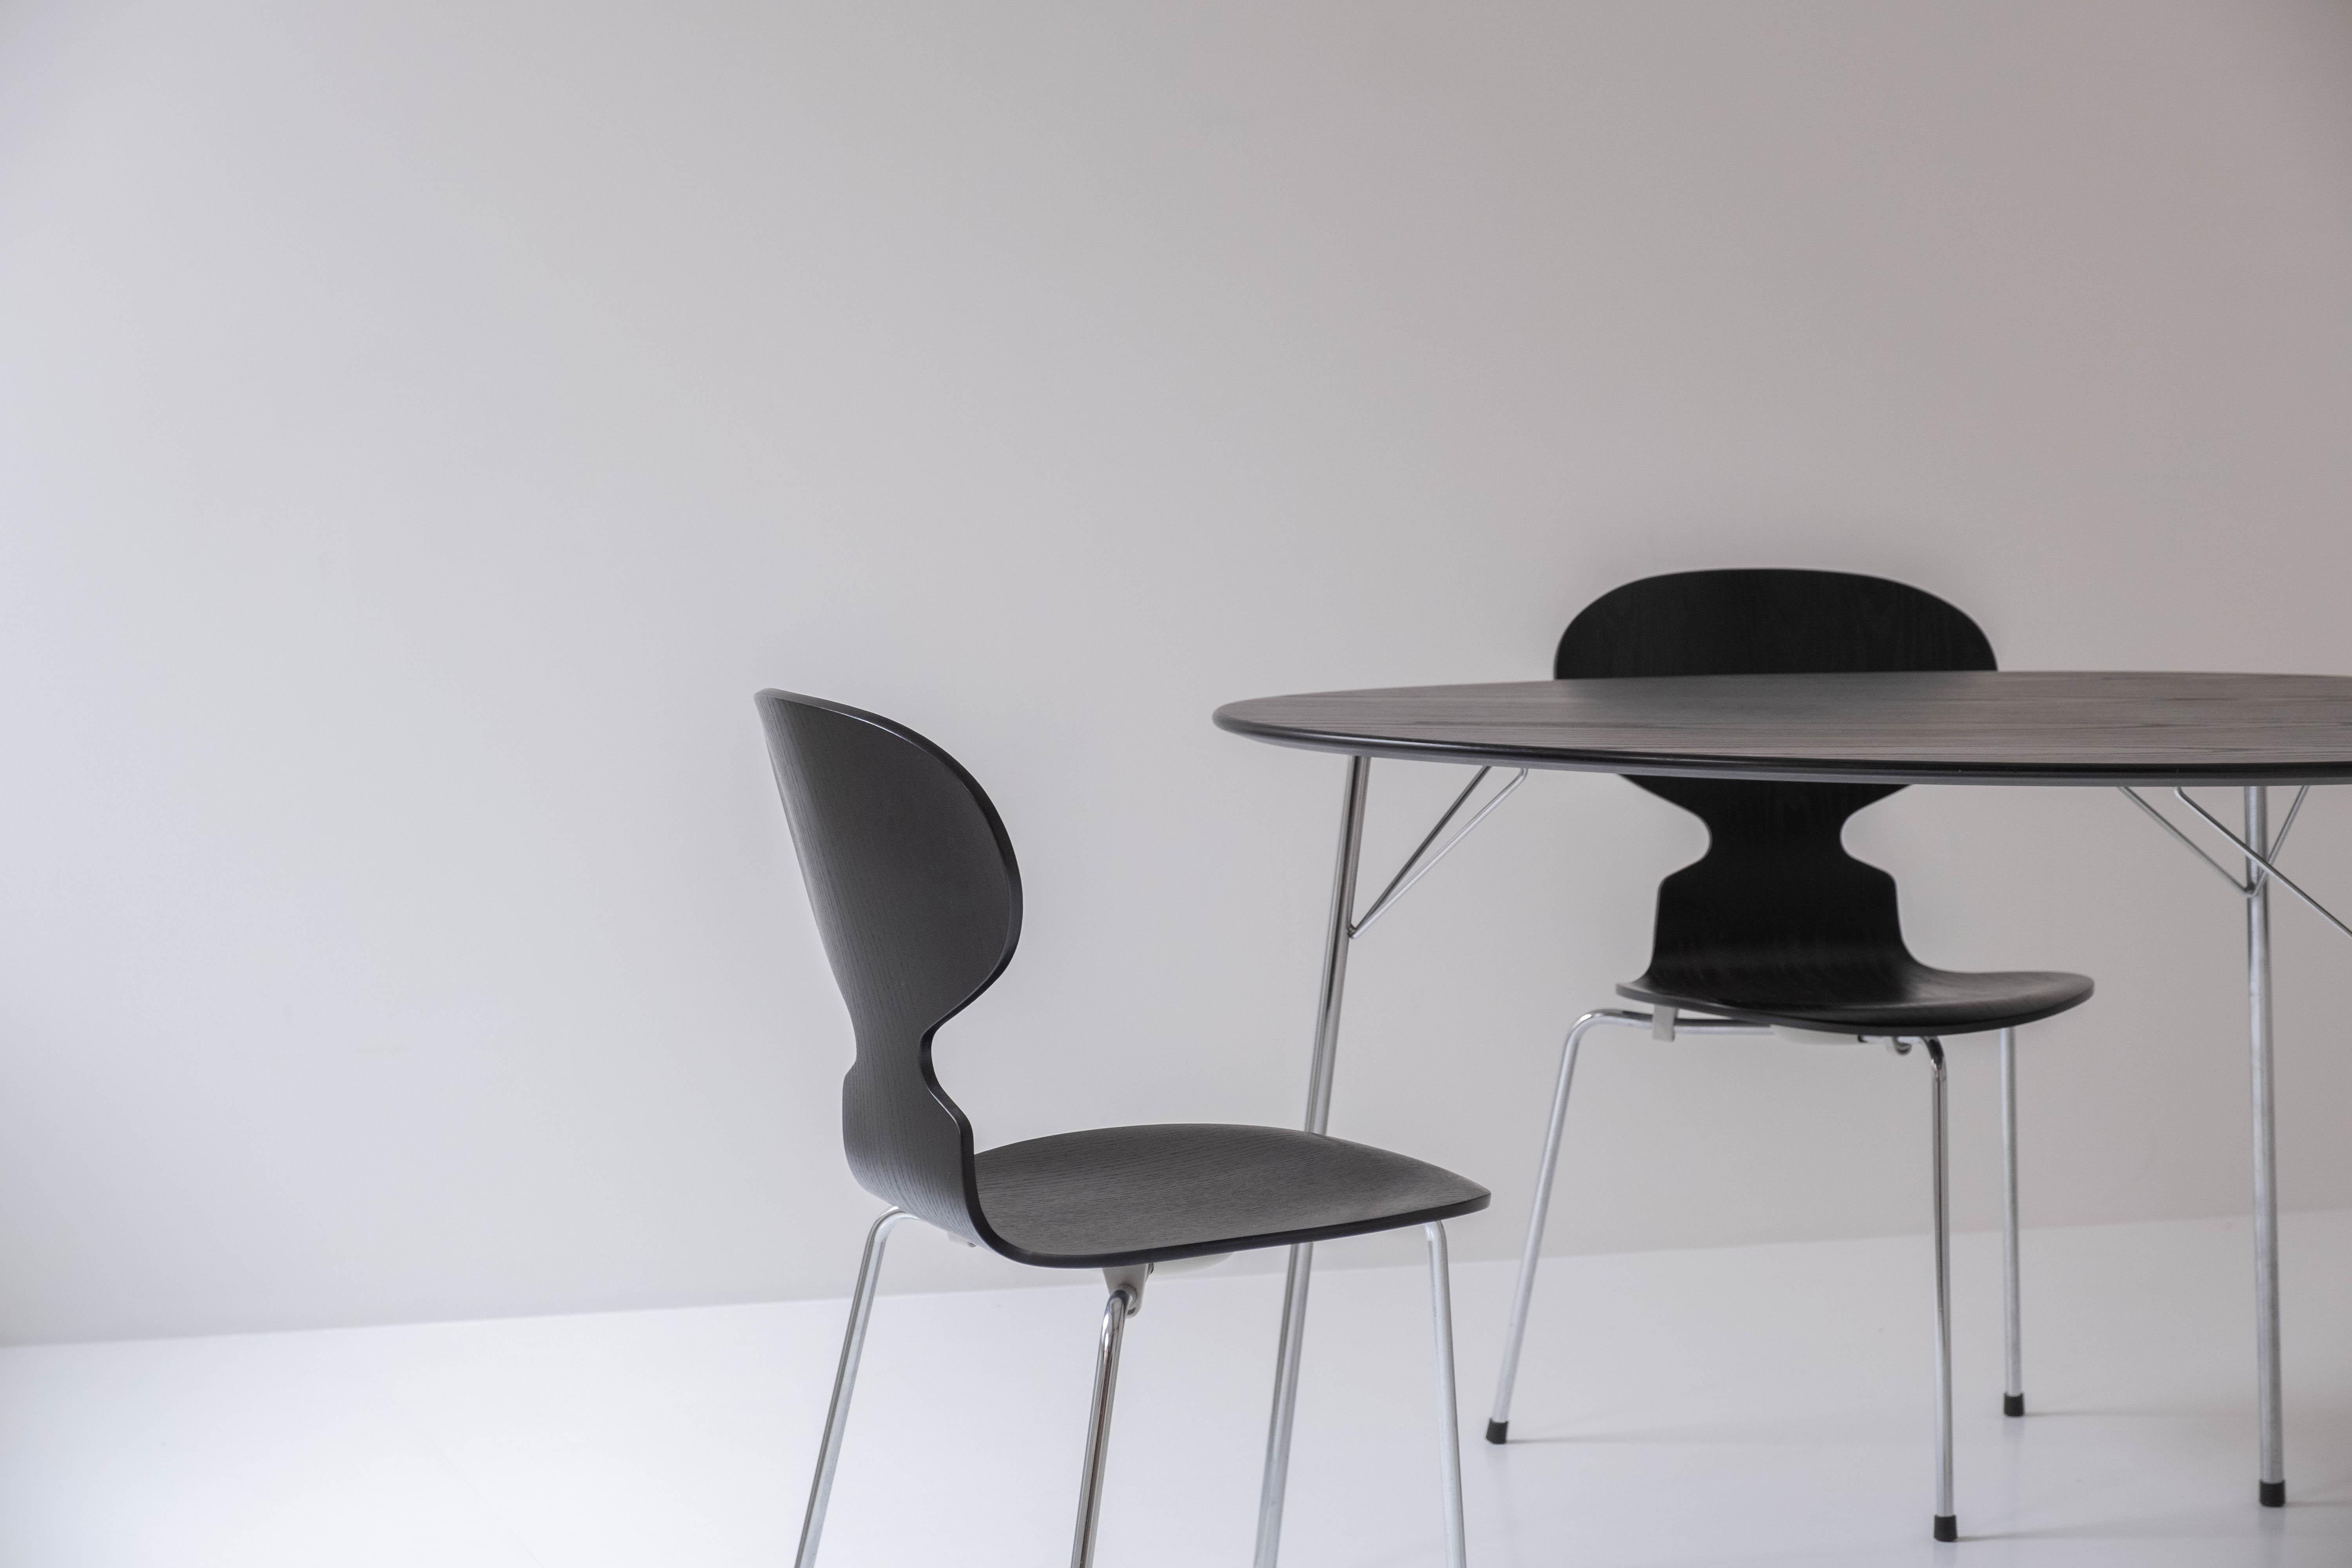 Danish Limited Edition ‘100th Anniversary’ Ant Set by Arne Jacobsen for Fritz Hansen